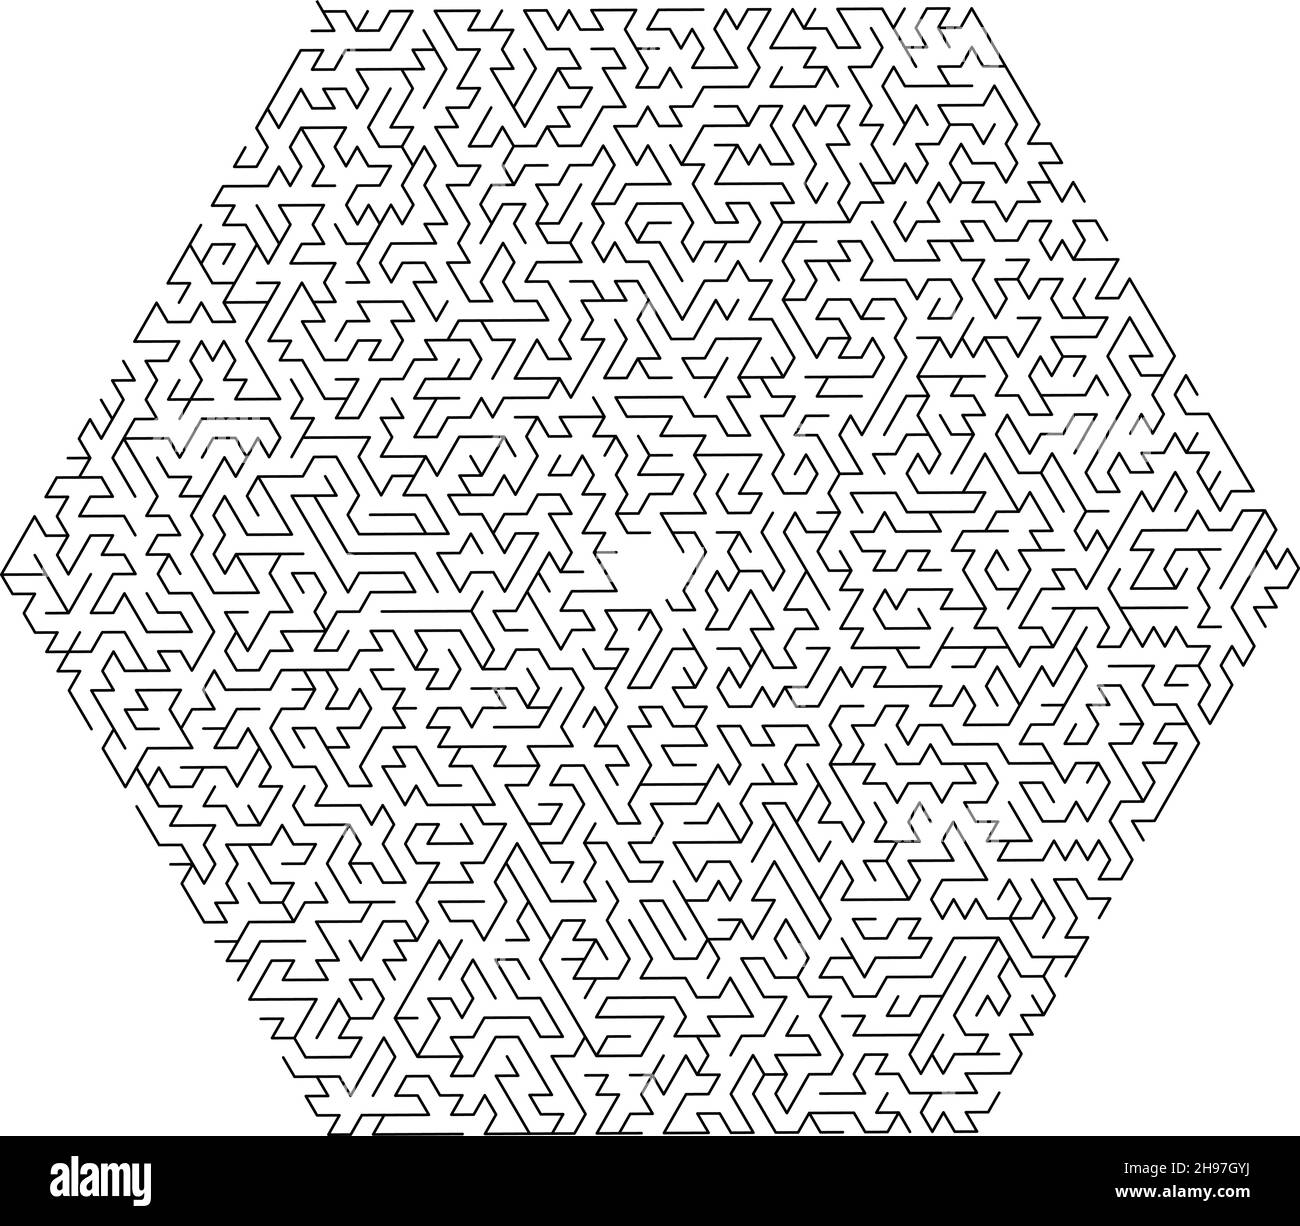 Vector labyrinth background, maze illustration isolated over white background Stock Vector